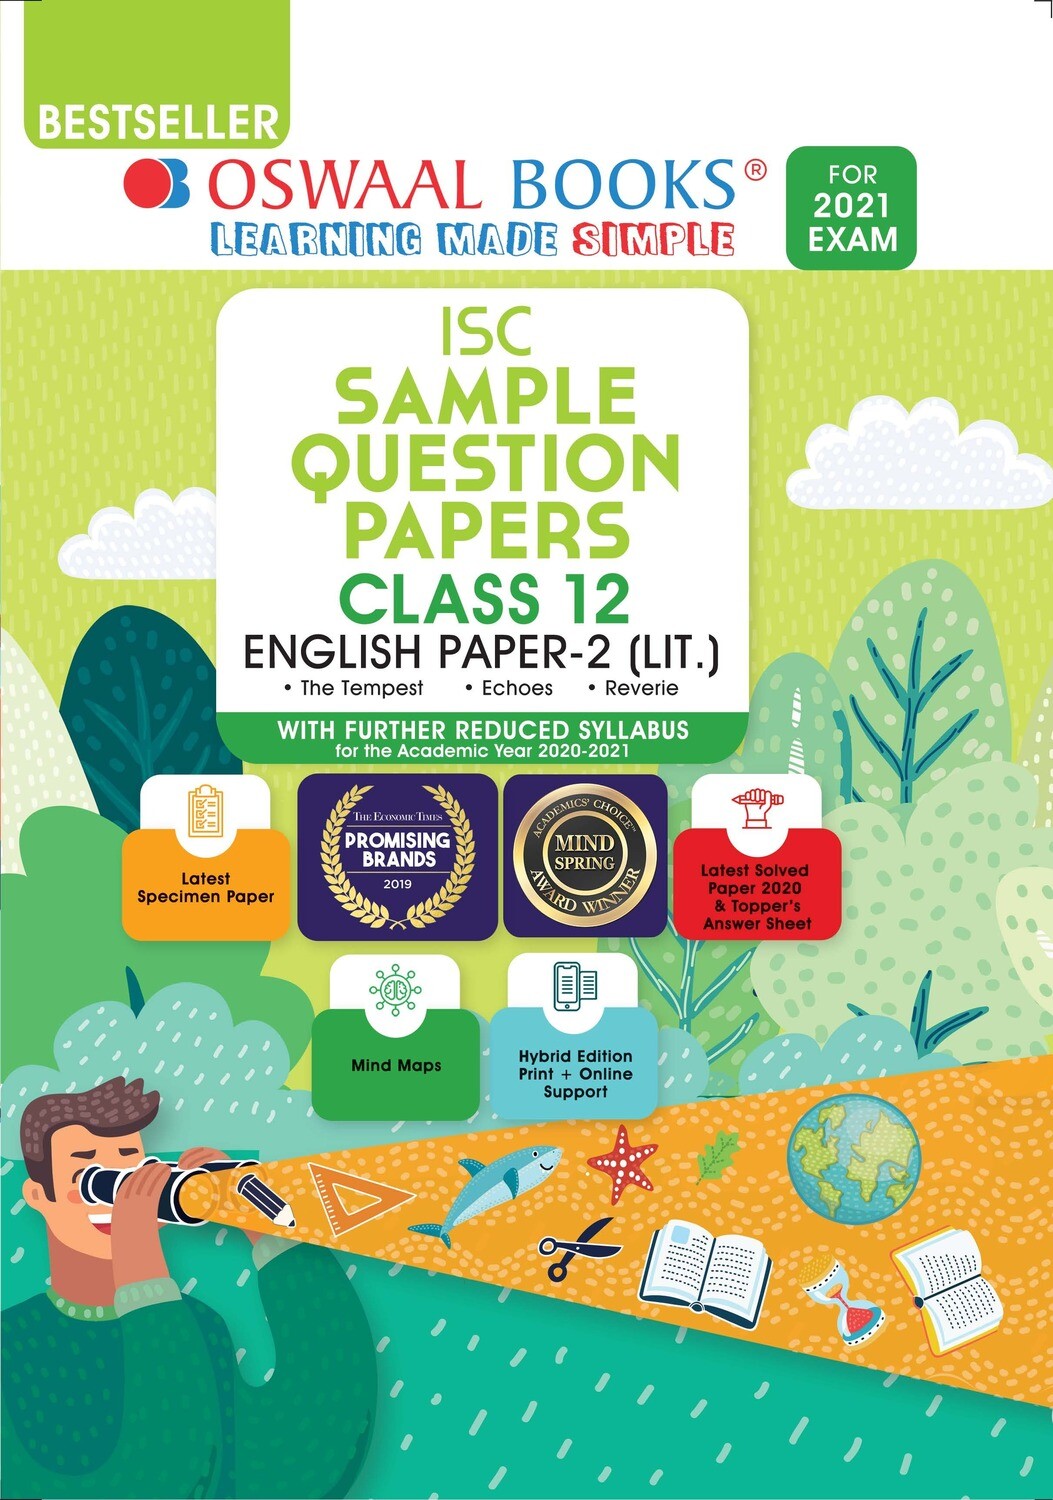 Buy e-book: Oswaal ISC Sample Question Papers Class 12 English Papers 2 Literature (For 2021 Exam)